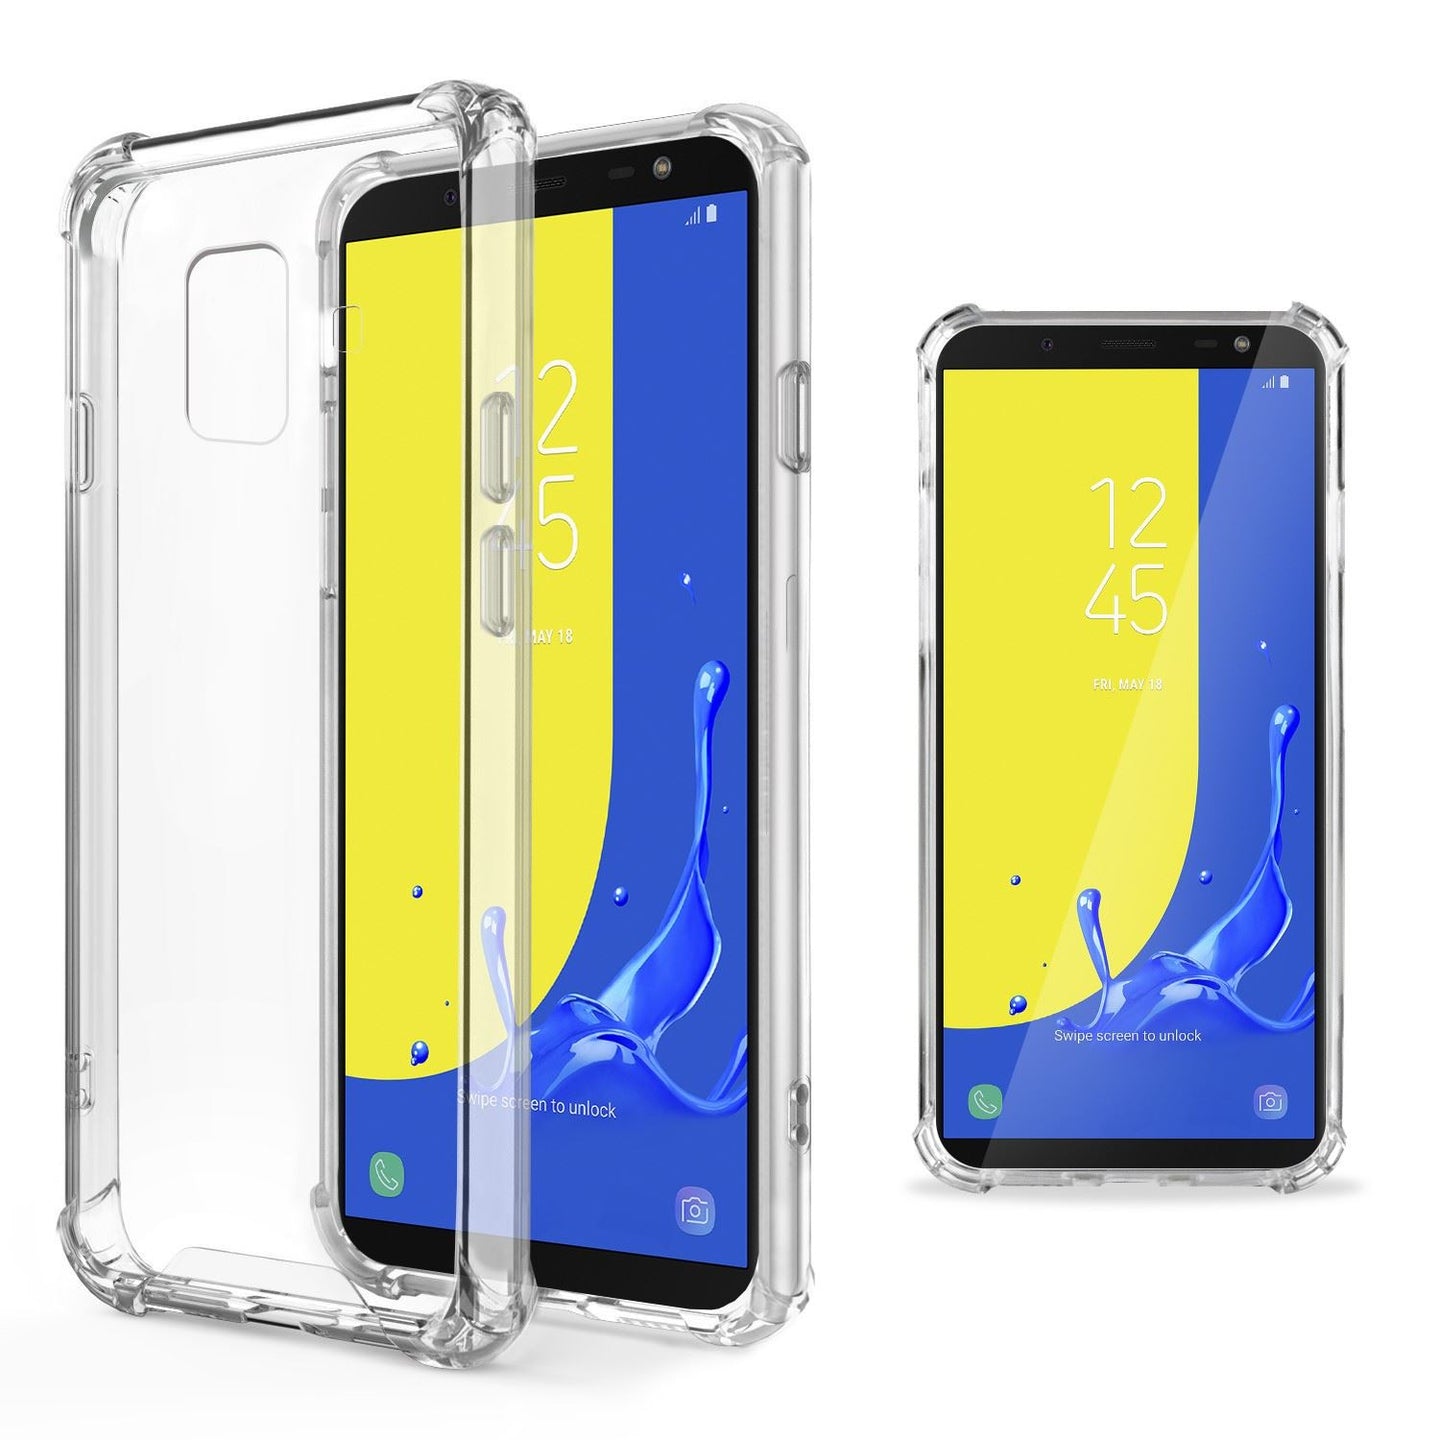 Moozy Shock Proof Silicone Case for Samsung J6, Galaxy J6 2018 - Transparent Crystal Clear Phone Case Soft TPU Cover